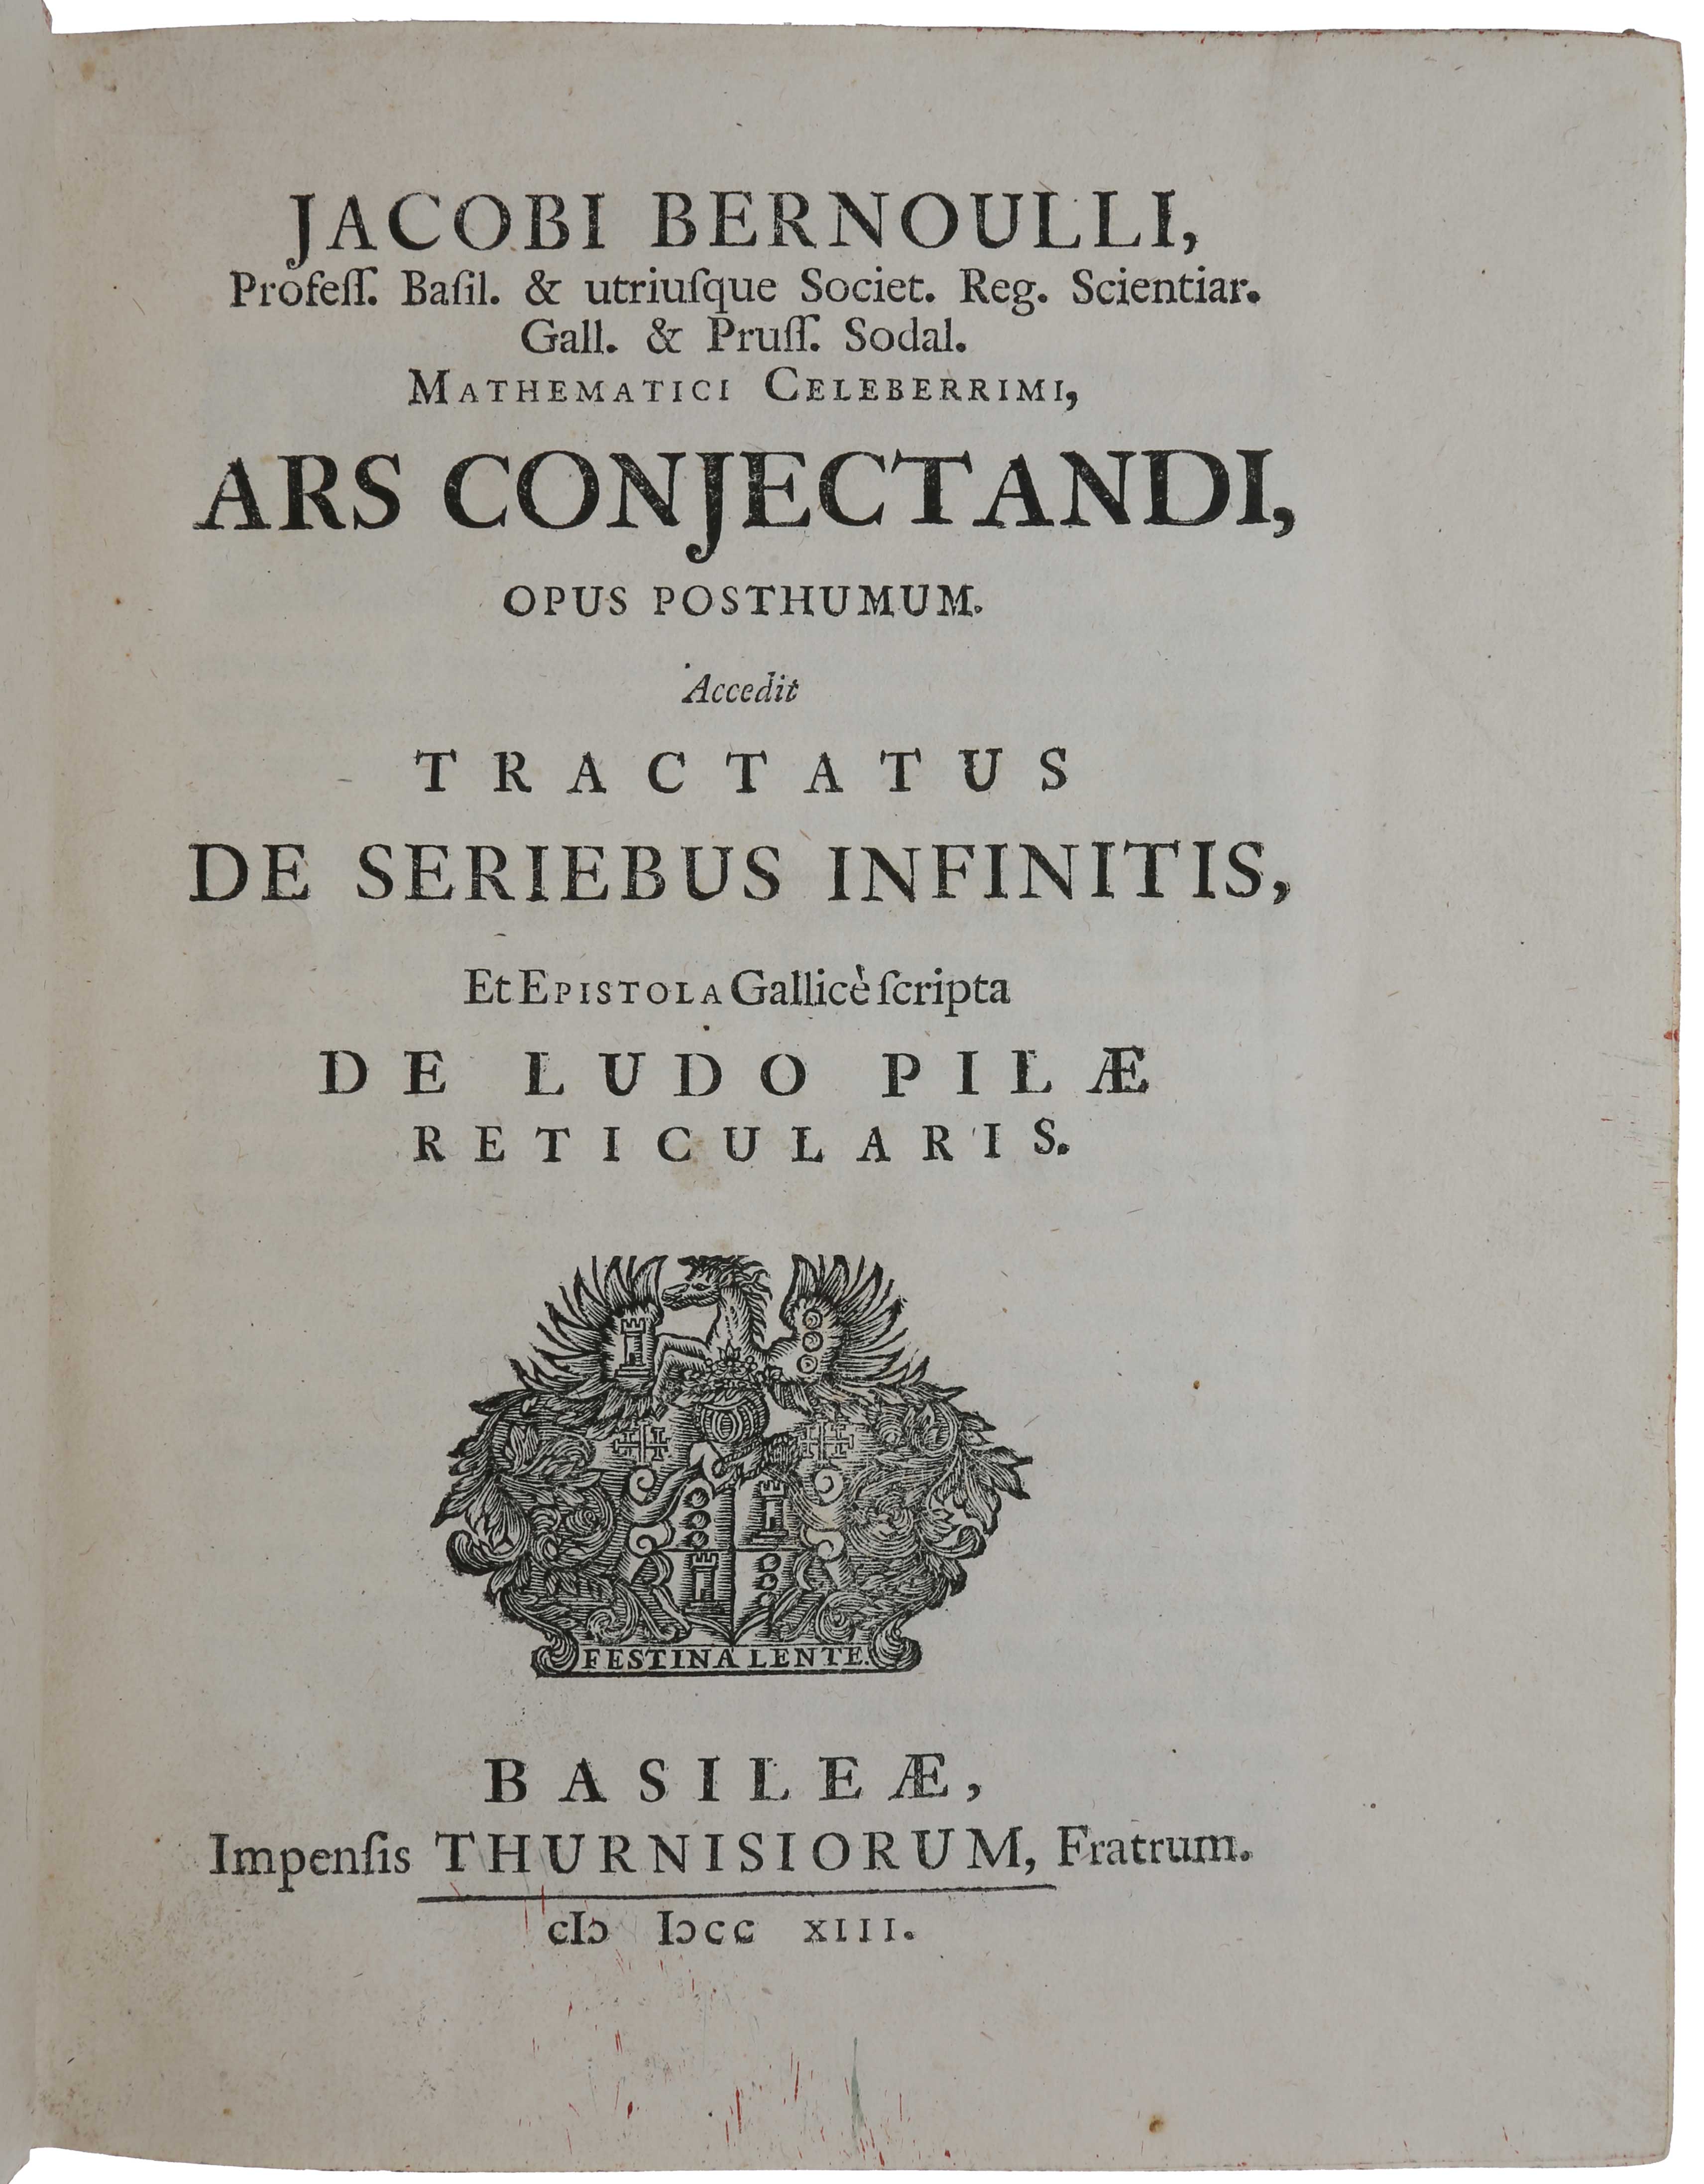 Ars Conjectandl - Jacob Bernoulli's post-humously published book (1713) included the work after which the notable probability distribution - the Bernoulli distribution - was named.